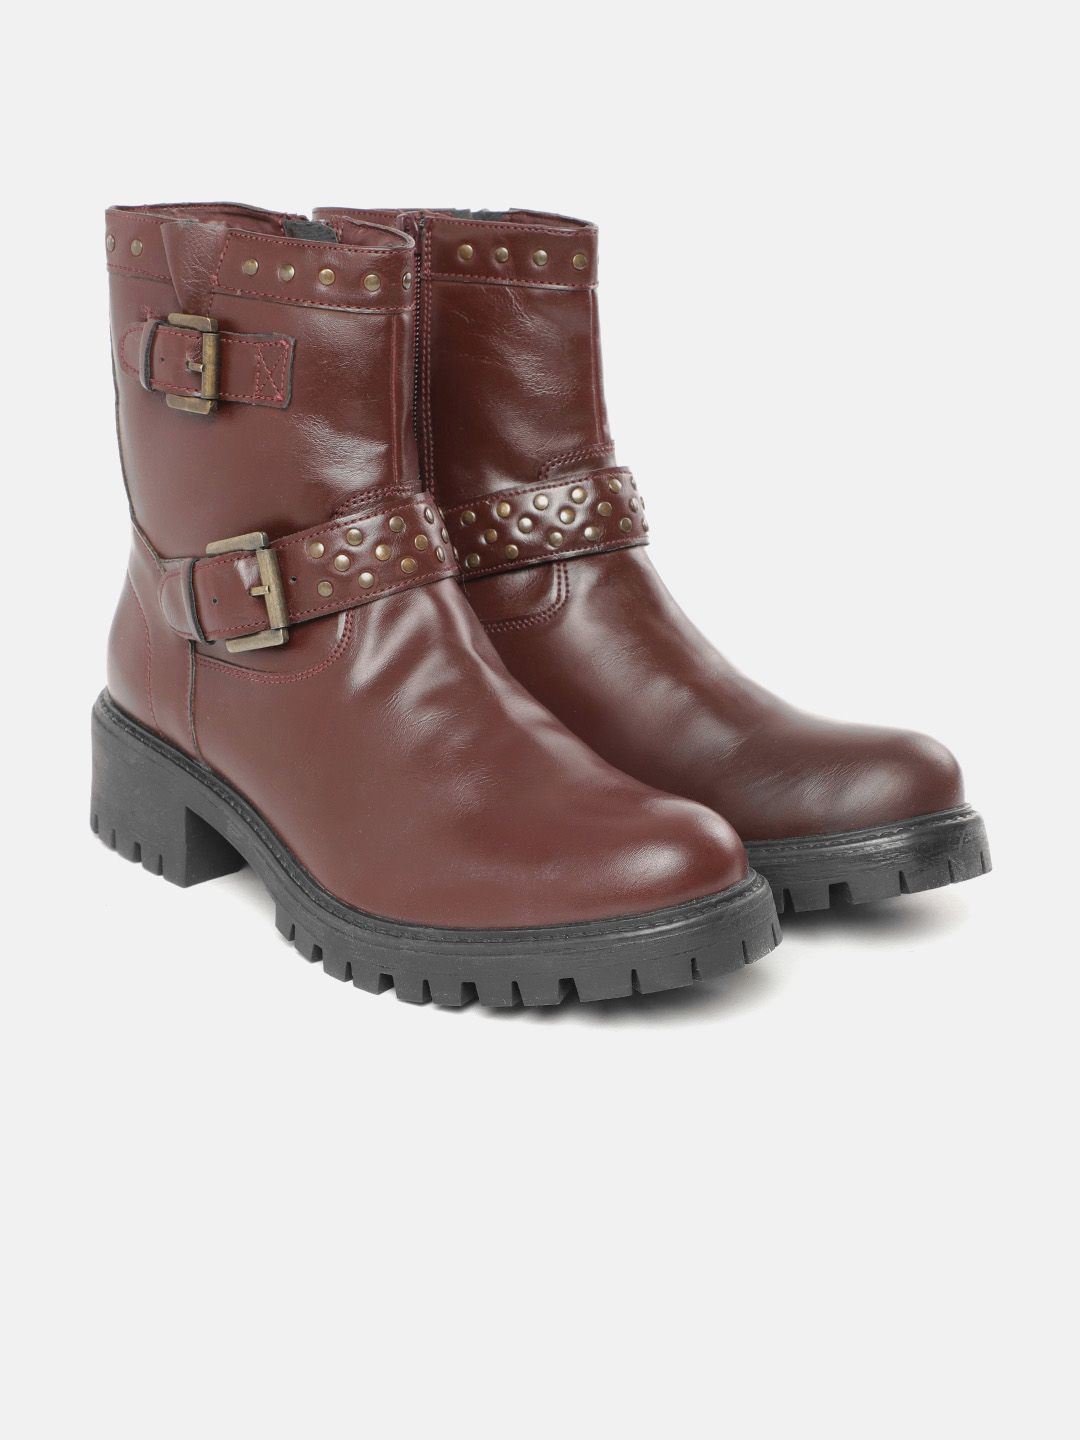 Roadster Burgundy Block Heeled Boots with Buckles Price in India